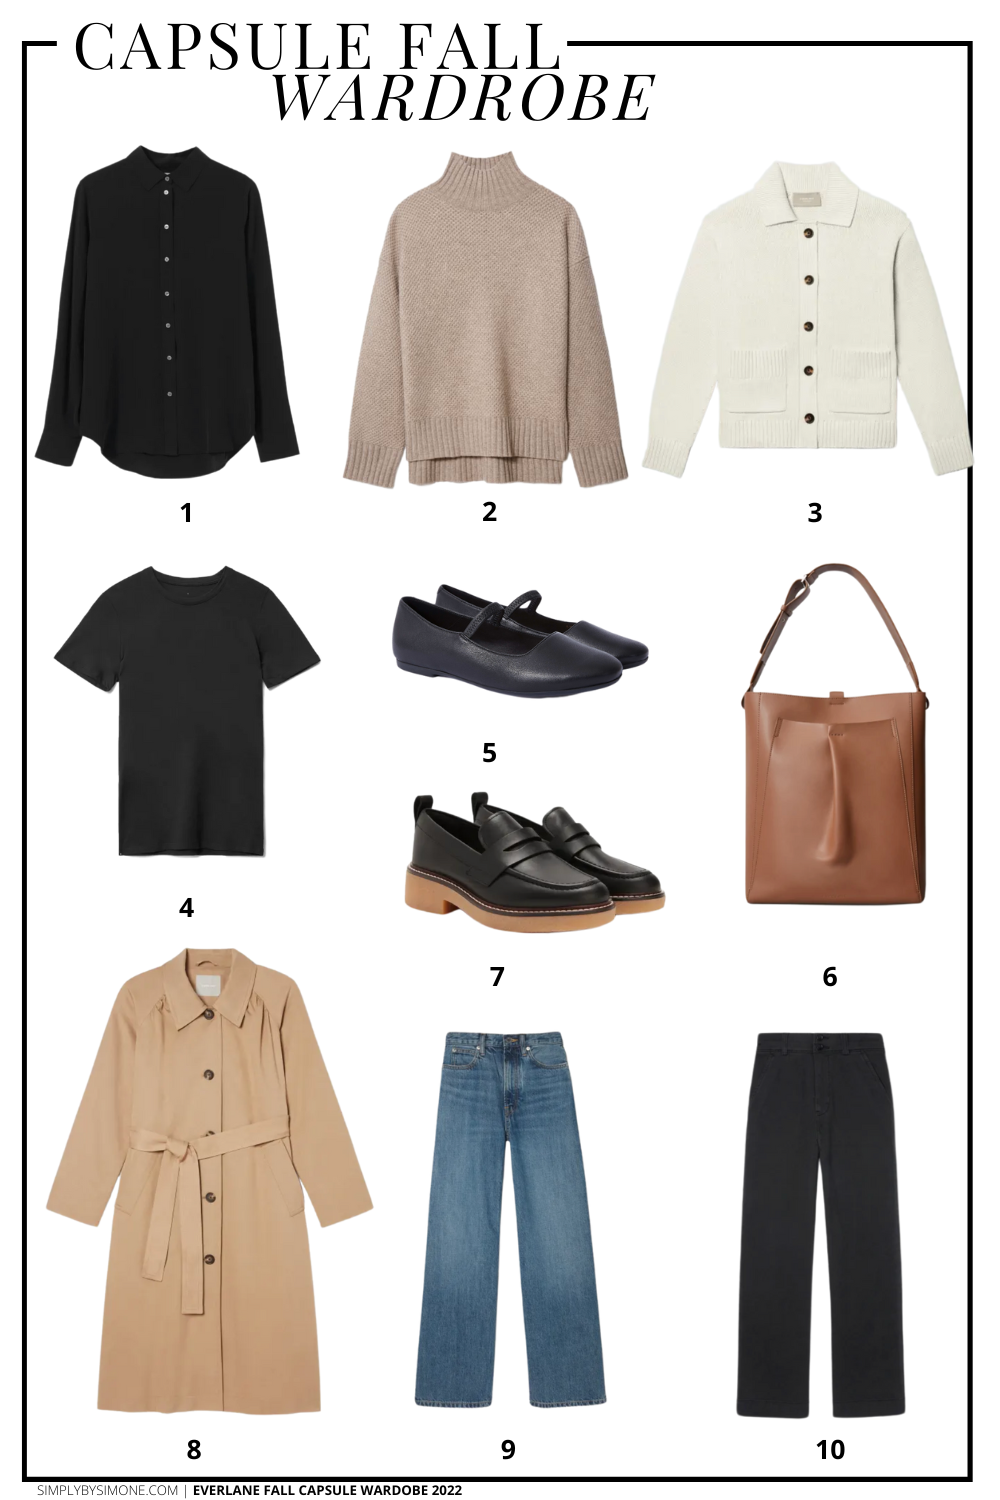 Everlane Summer Capsule Wardrobe – 12 Pieces, 48 Outfits